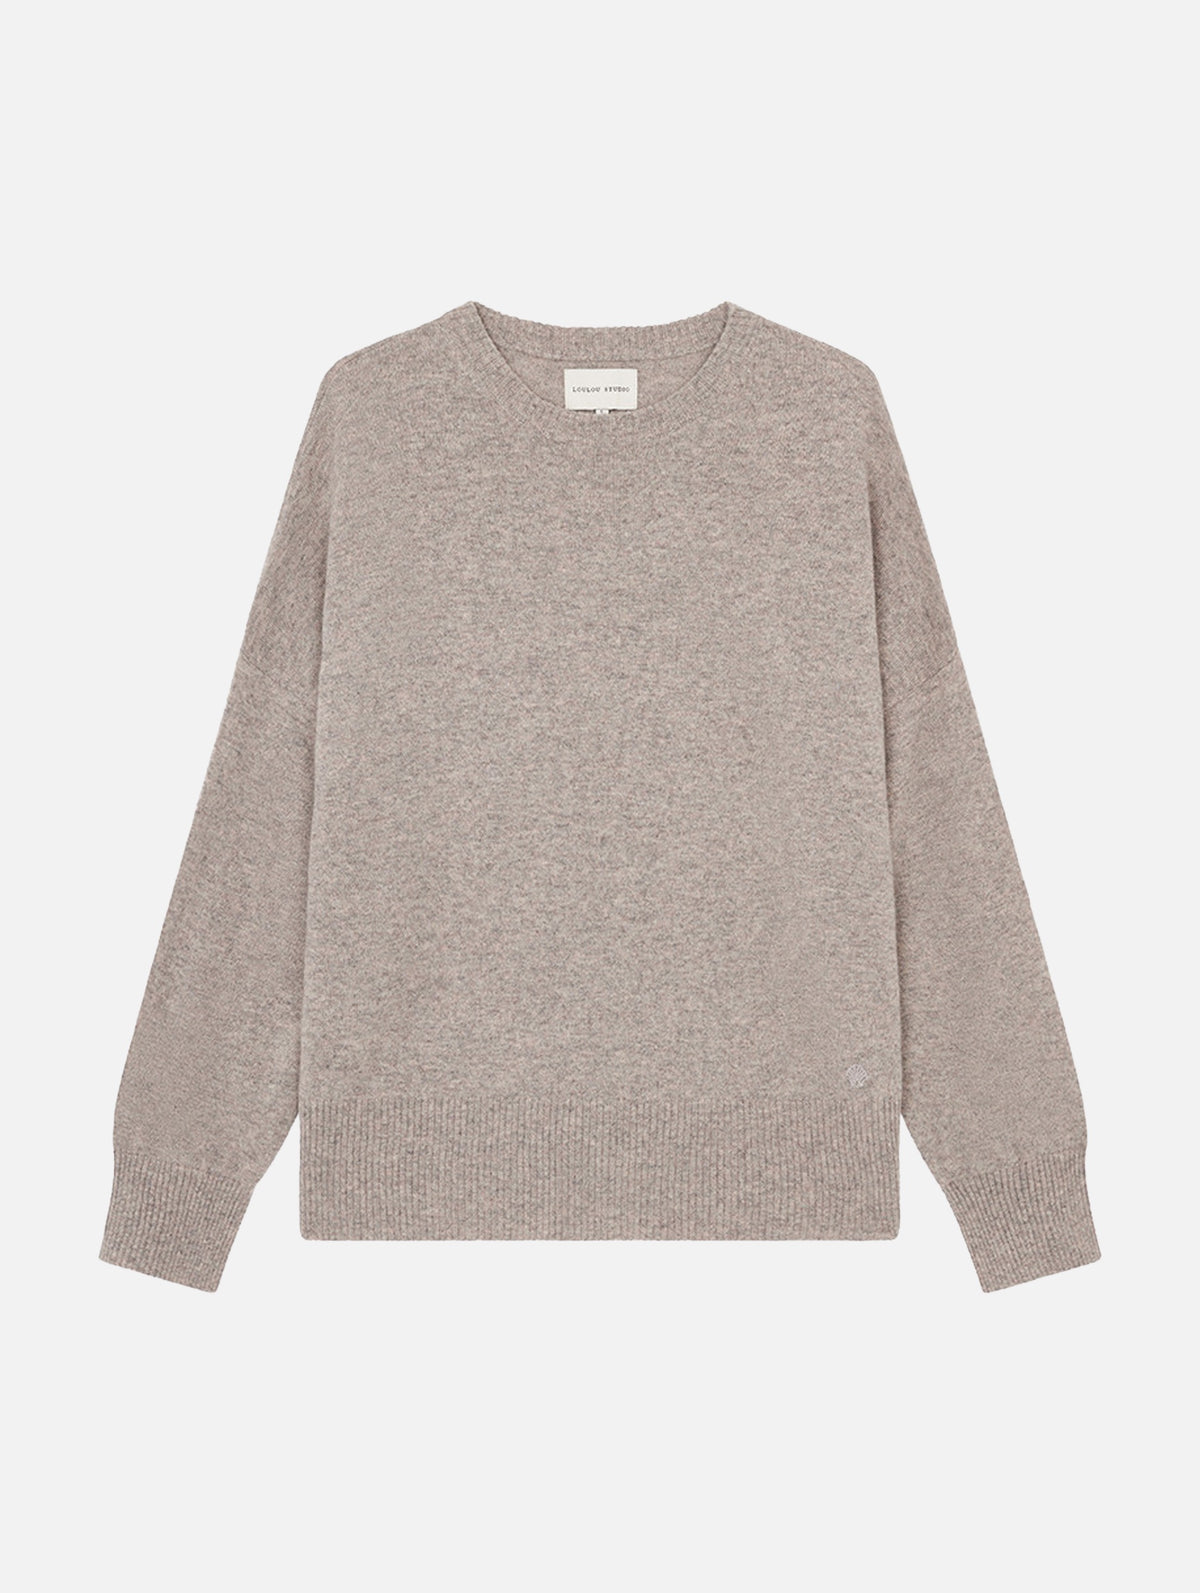 Anaa Cashmere Sweater in Bloom Melange